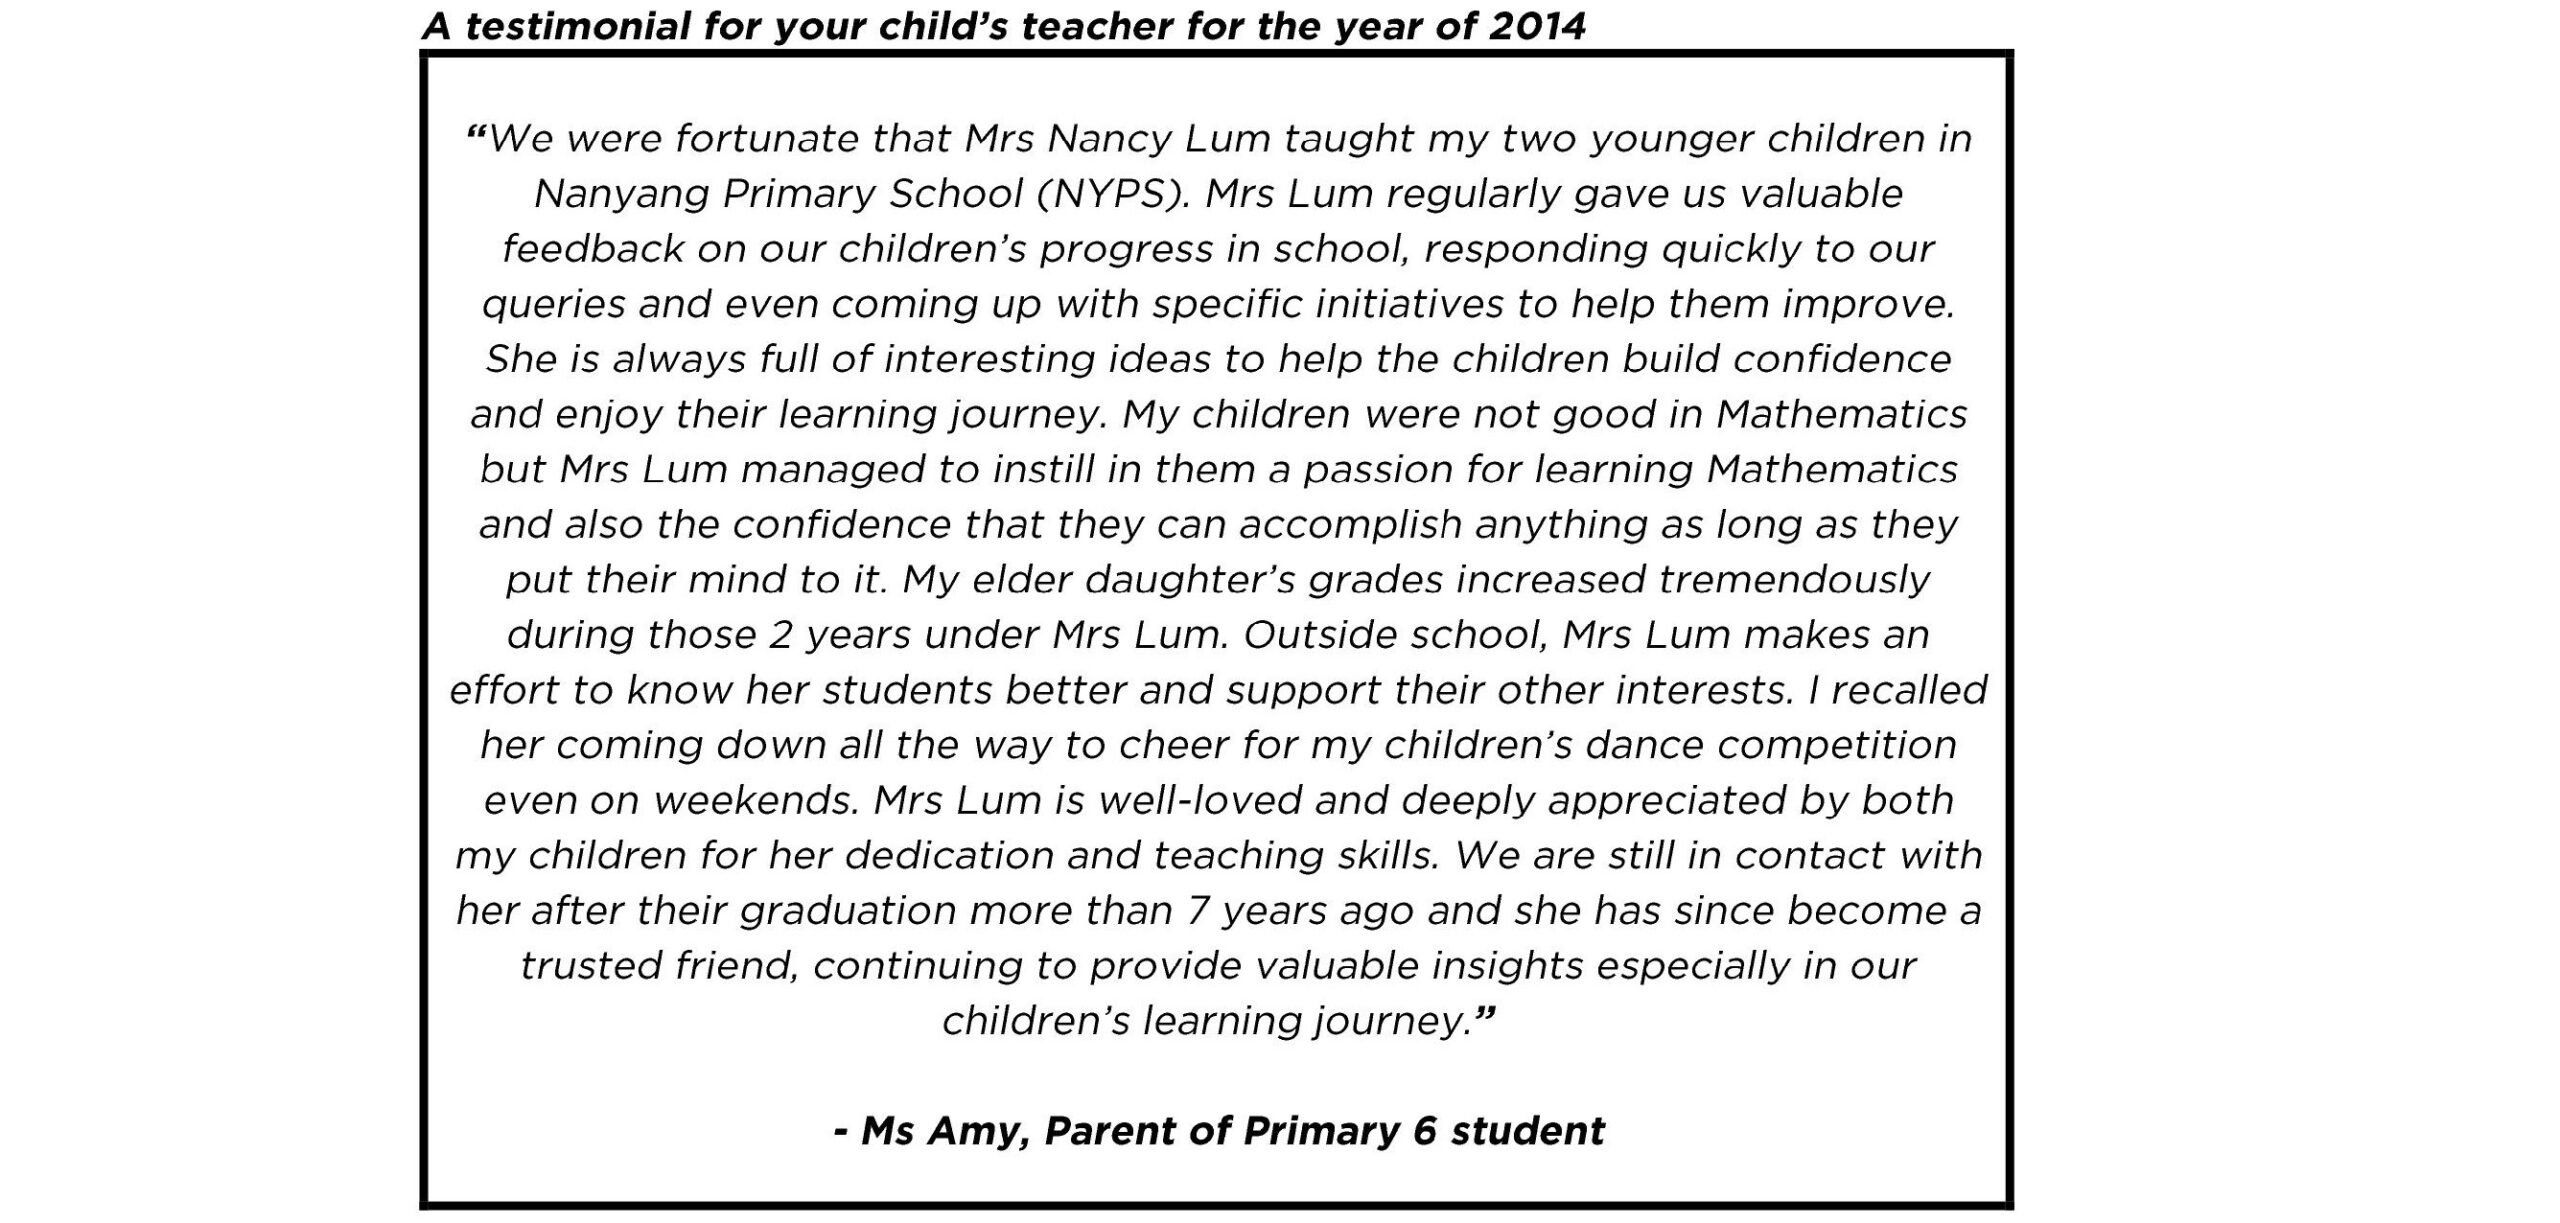 "Mrs Lum is well-loved and deeply appreciated by both my children…"